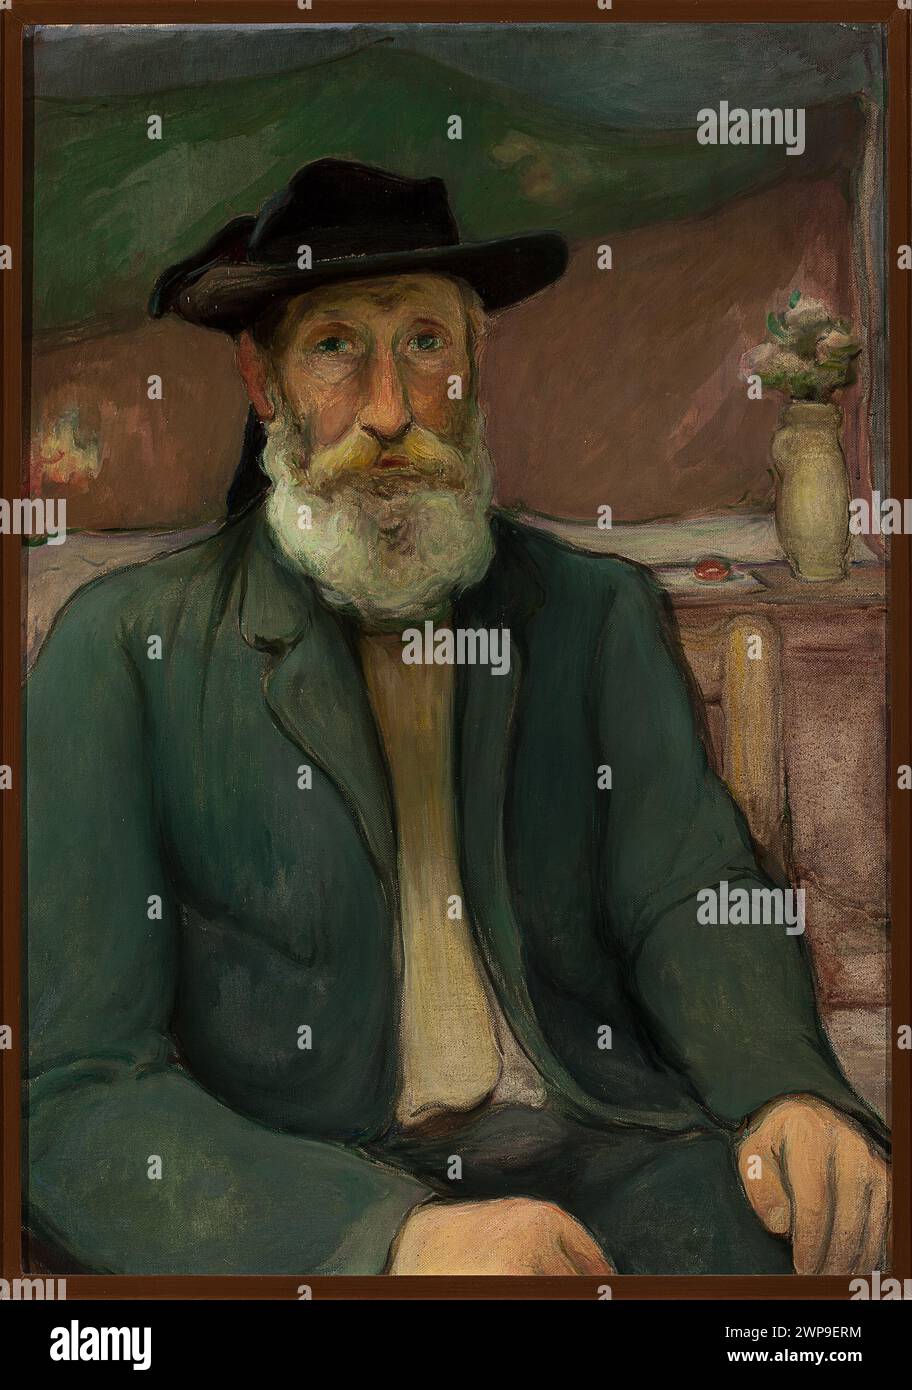 Self -portrait in a bavet hat; Lewy, W Adys Aw (1854 cars 1856-1918); 1912 (1912-00-00-1912-00-00);Young Poland (style), artists, self-portraits, self-portraits in the interior, painters, portraits, Breton costumes, synthetic (style), purchase (provenance), Ślewiński, Władysław (1856-1918), Ślewiński, Władysław (1856-1918)-iconography Stock Photo